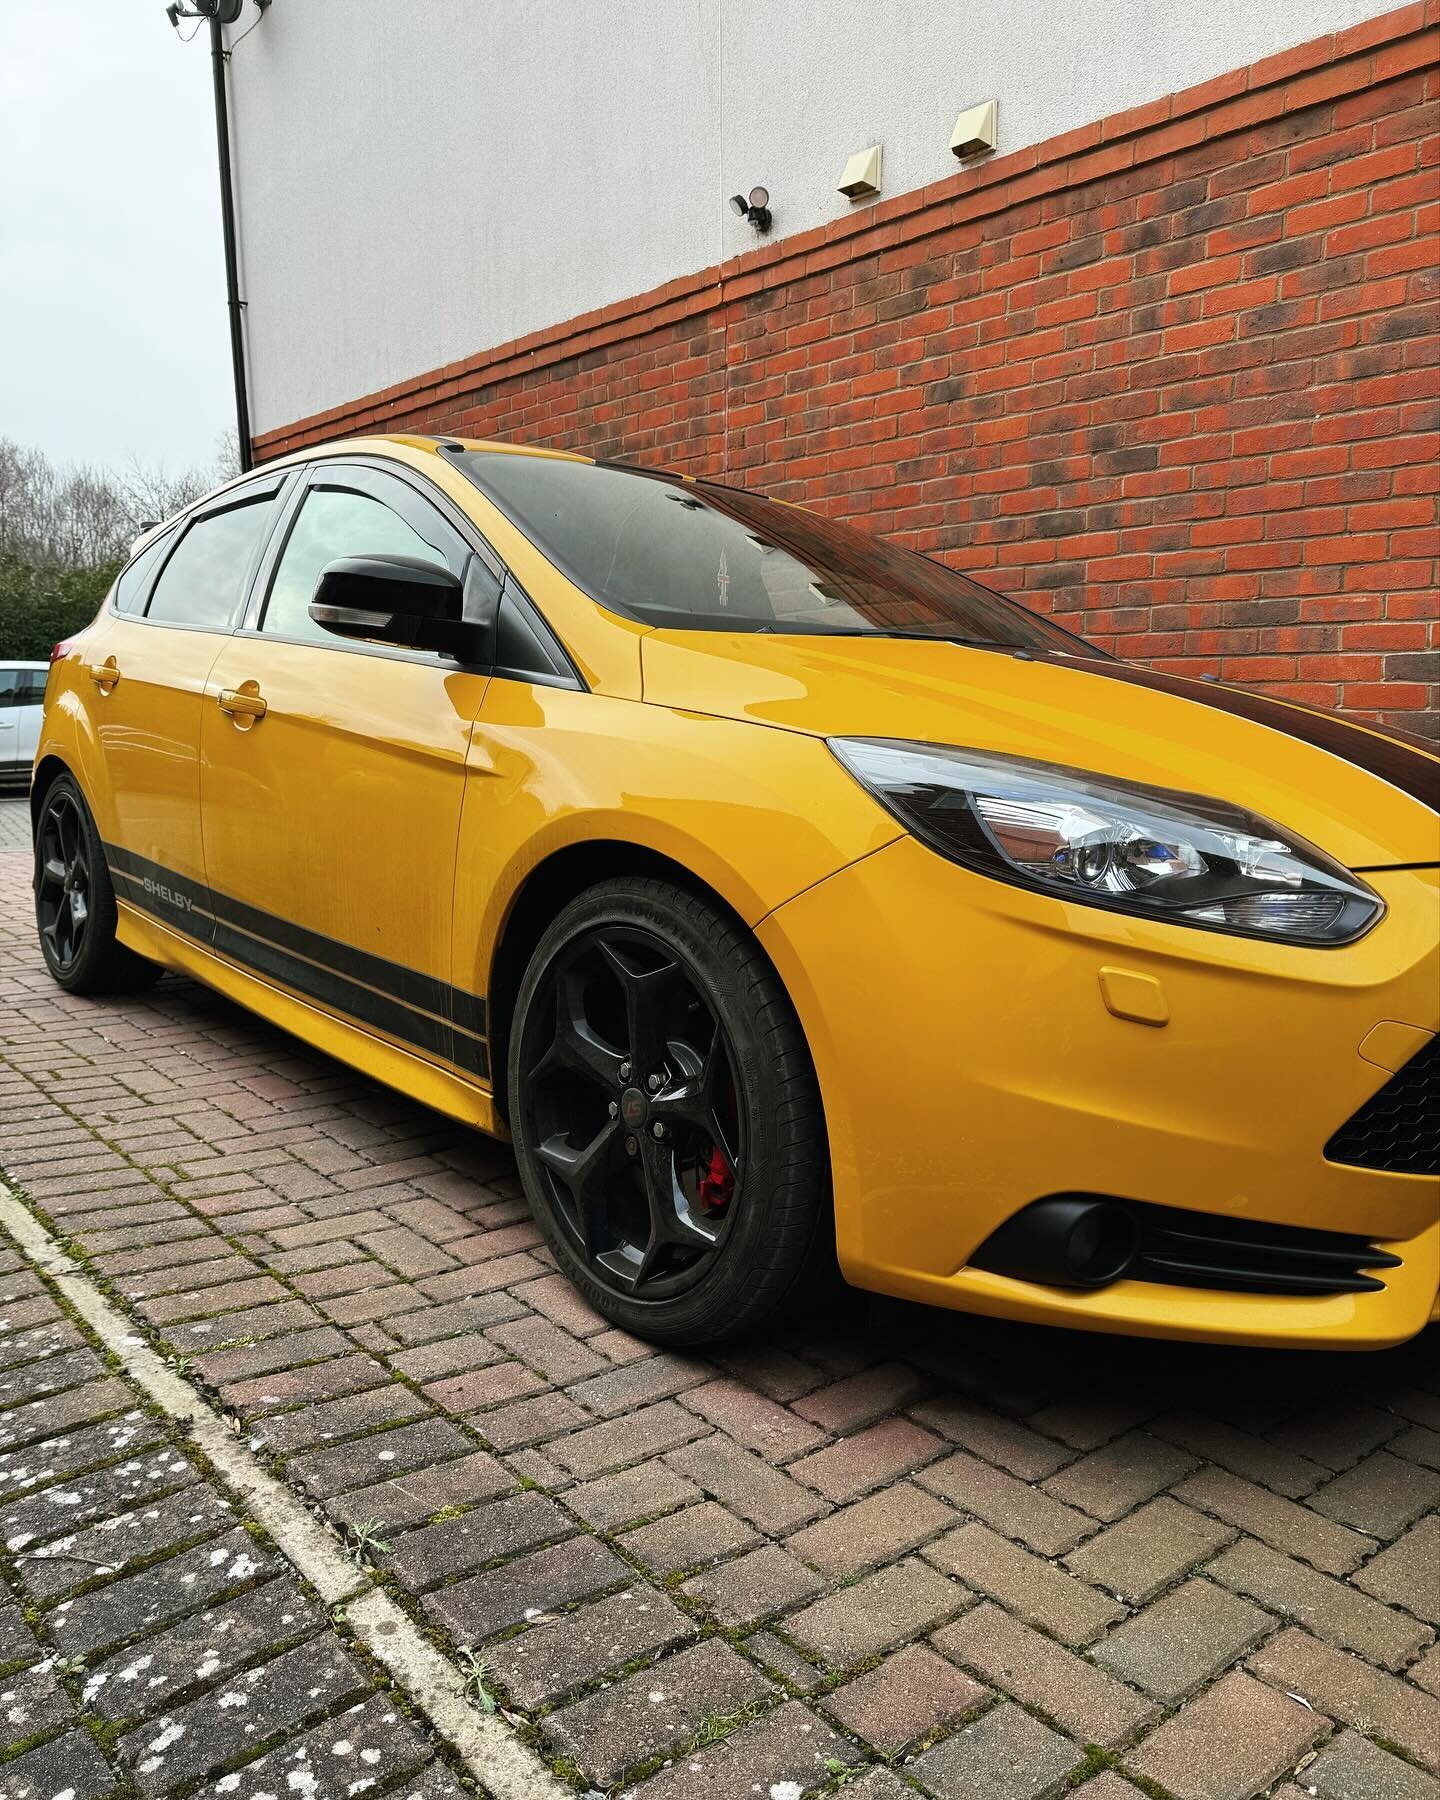 Ford Focus Mk3 ST - 2.0T Ecoboost

Stage 1.5 Performance Remap

📈 250 bhp ➡️ 280 bhp 📈
📈 360 nm ➡️ 440 nm 📈
__________________________________________
💻 Custom Software
📈 Performance
🌿 Economy
💥 Pops &amp; Bangs / Hardcut
⚙ Gearbox Tuning
🚘 